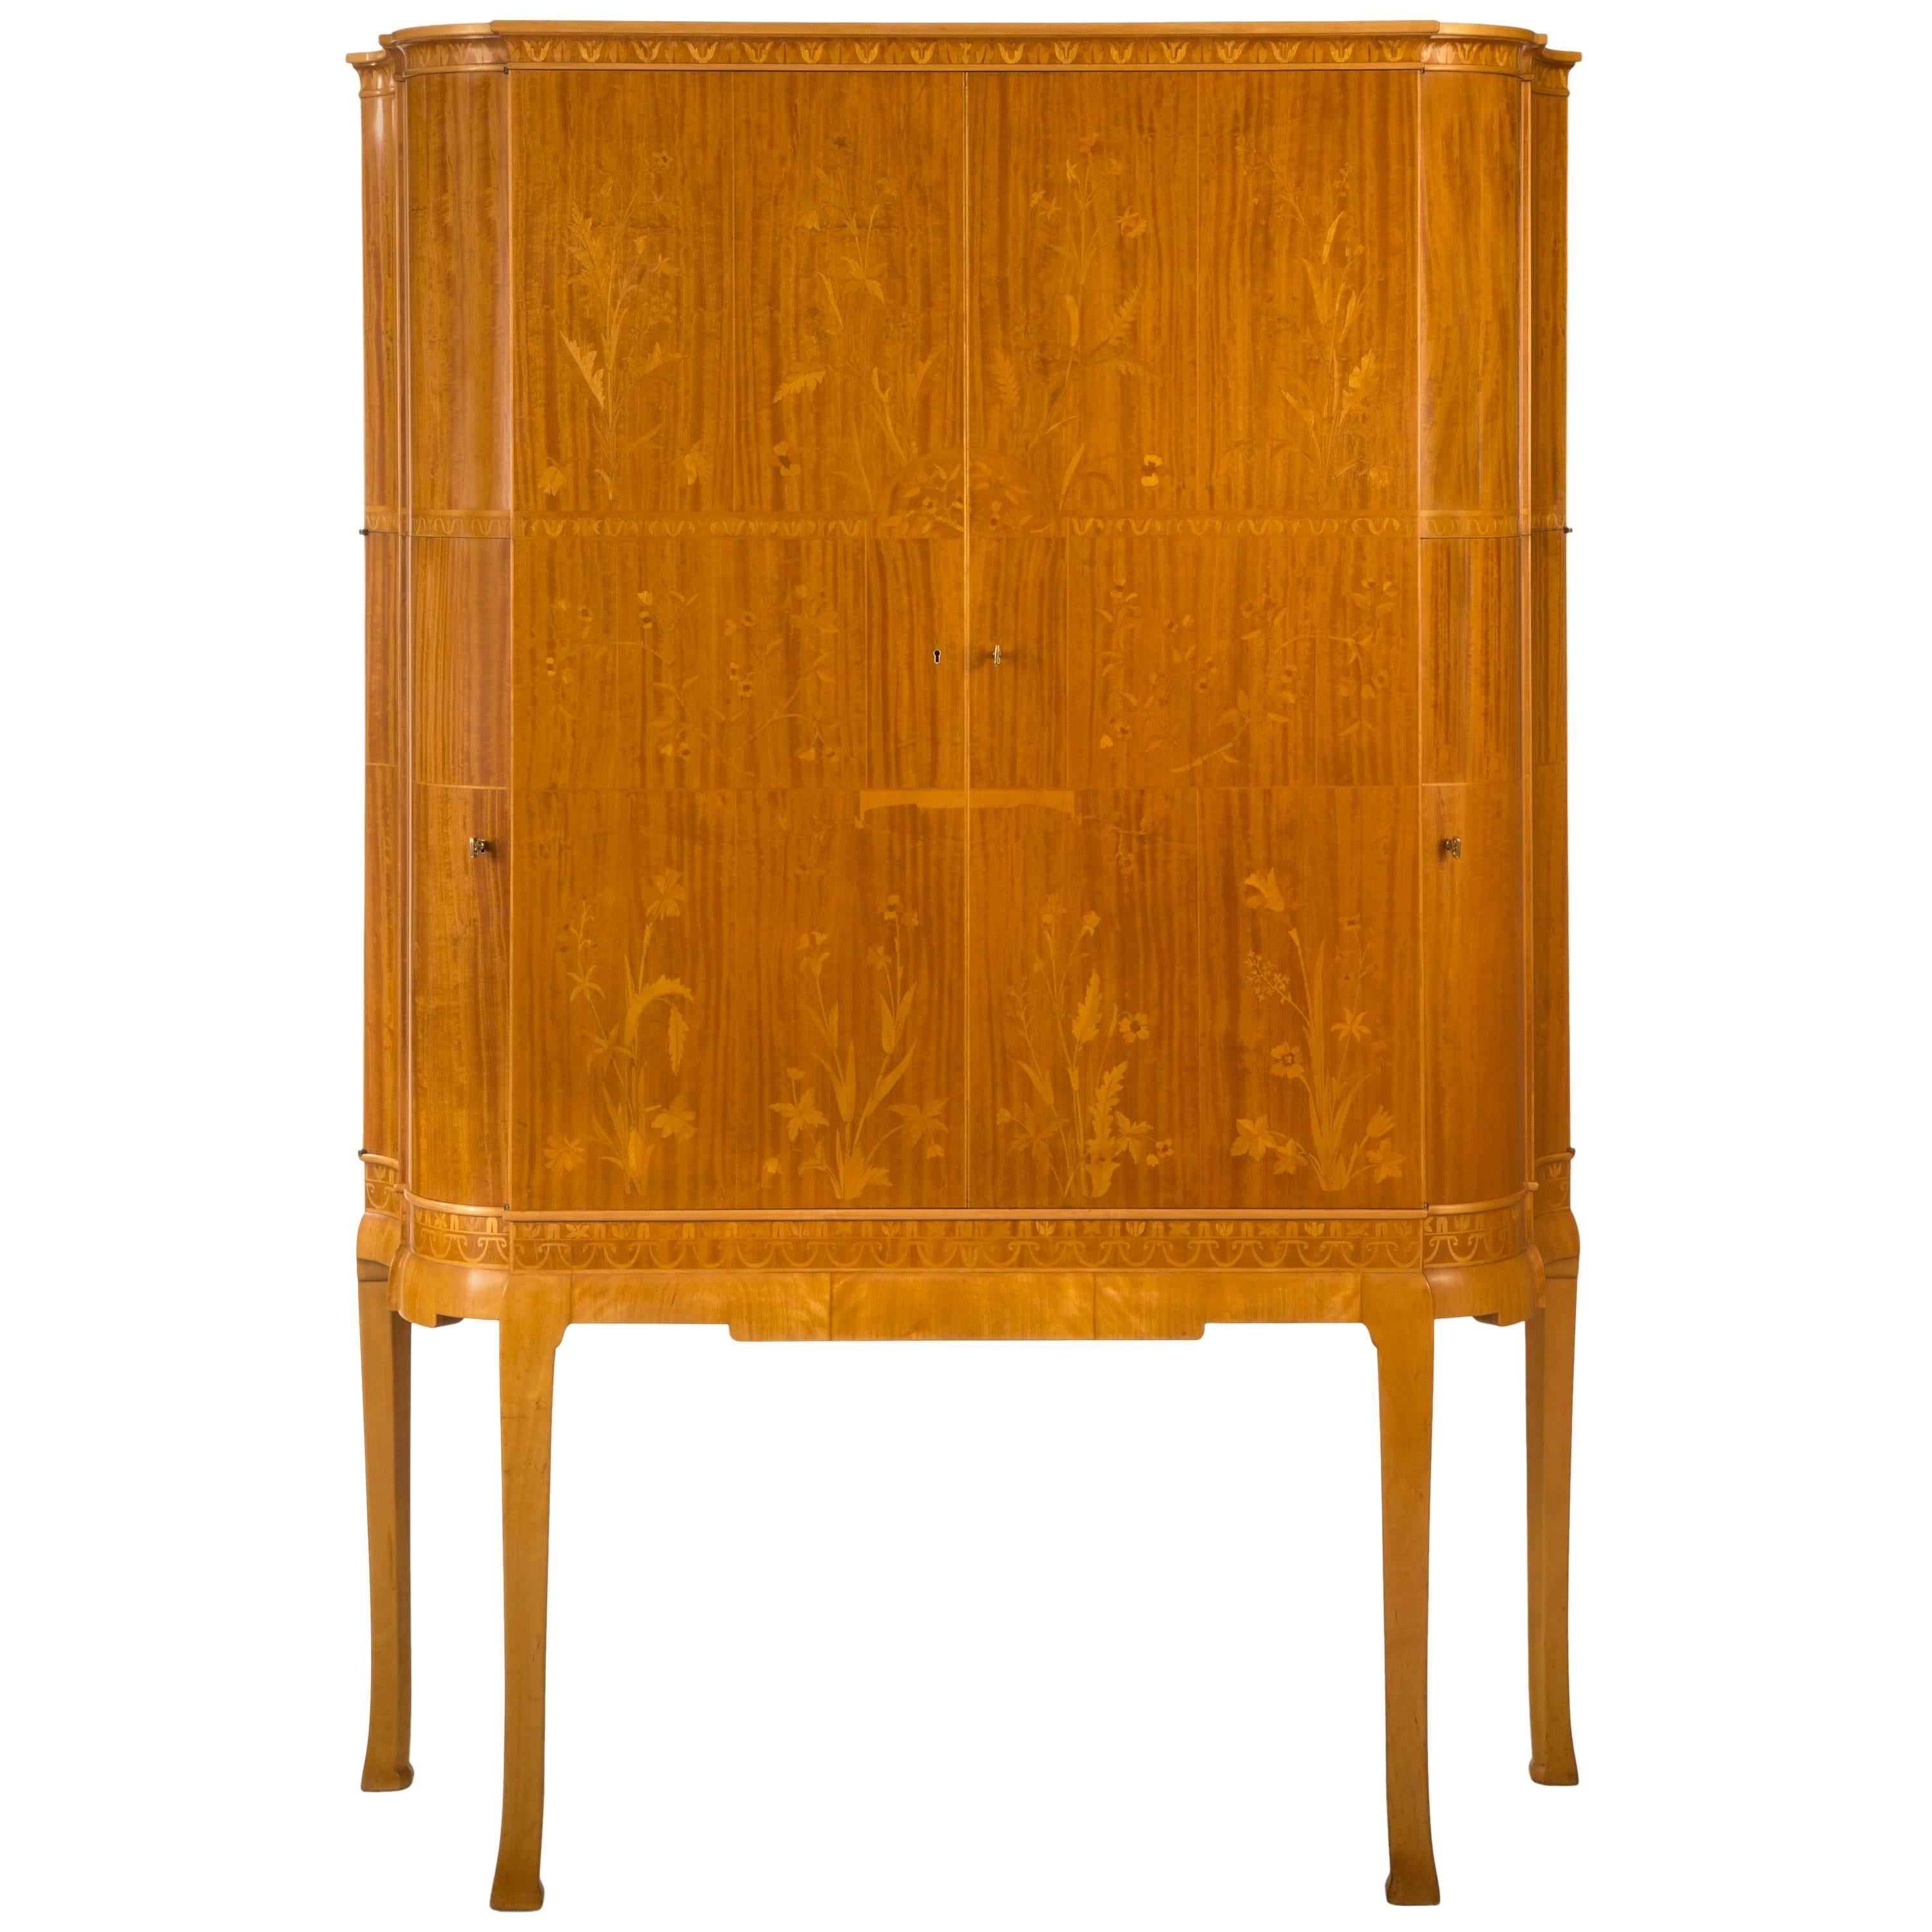 Carl Malmsten, Rare Swedish Marquetry, Satinwood and Birch Cabinet